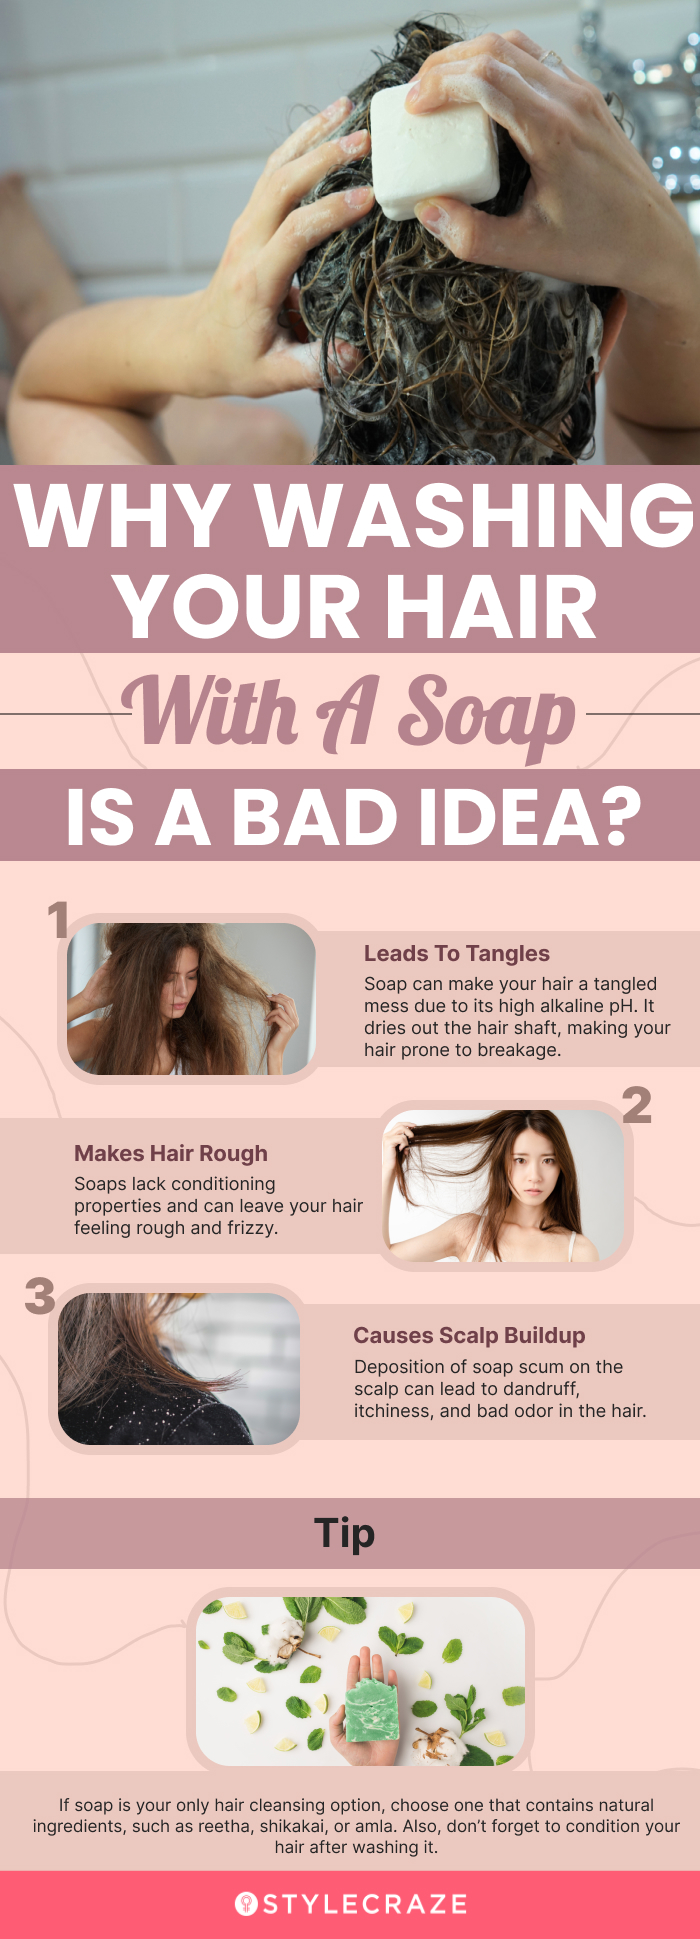 why washing your hair with a soap is a bad idea (infographic)